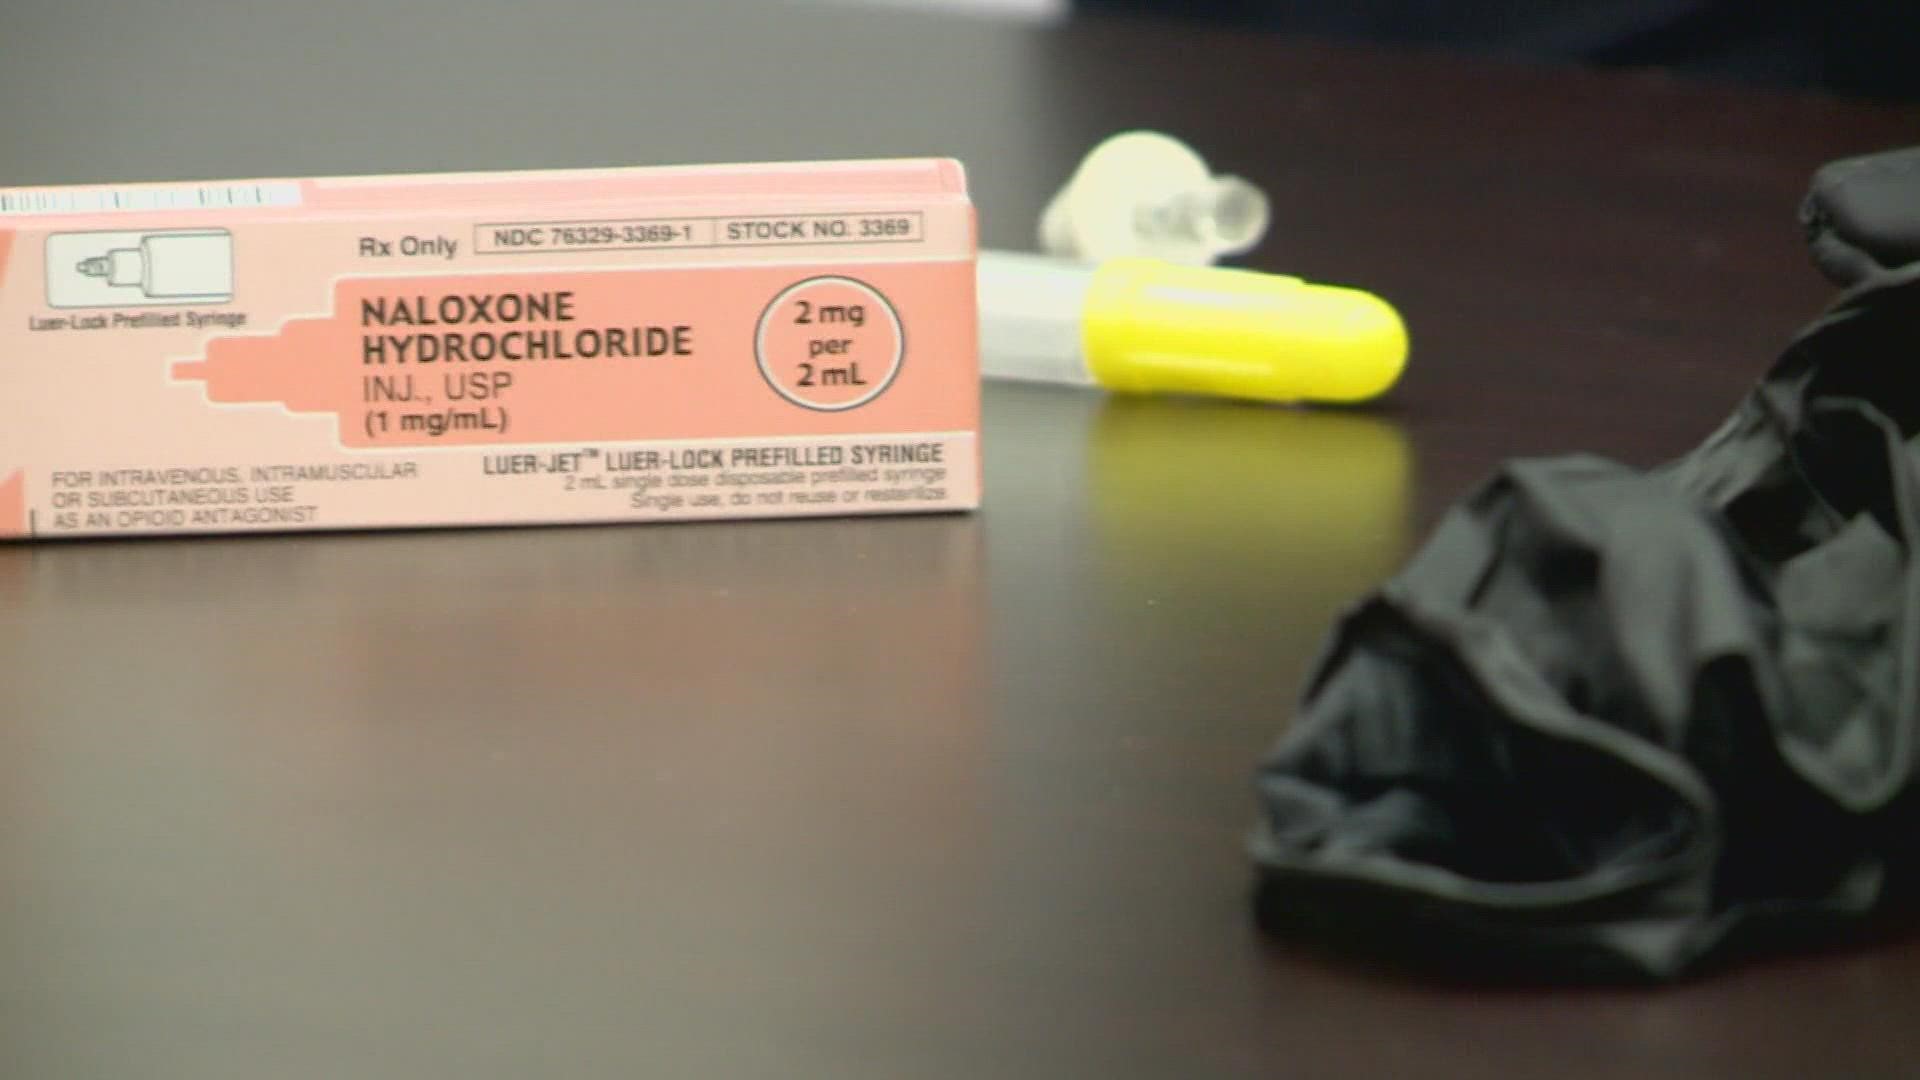 Assembly Bill 19, proposed by Joe Patterson, would require all public K-12 schools to have at least two doses of Narcan, or naloxone, on campus at all times.